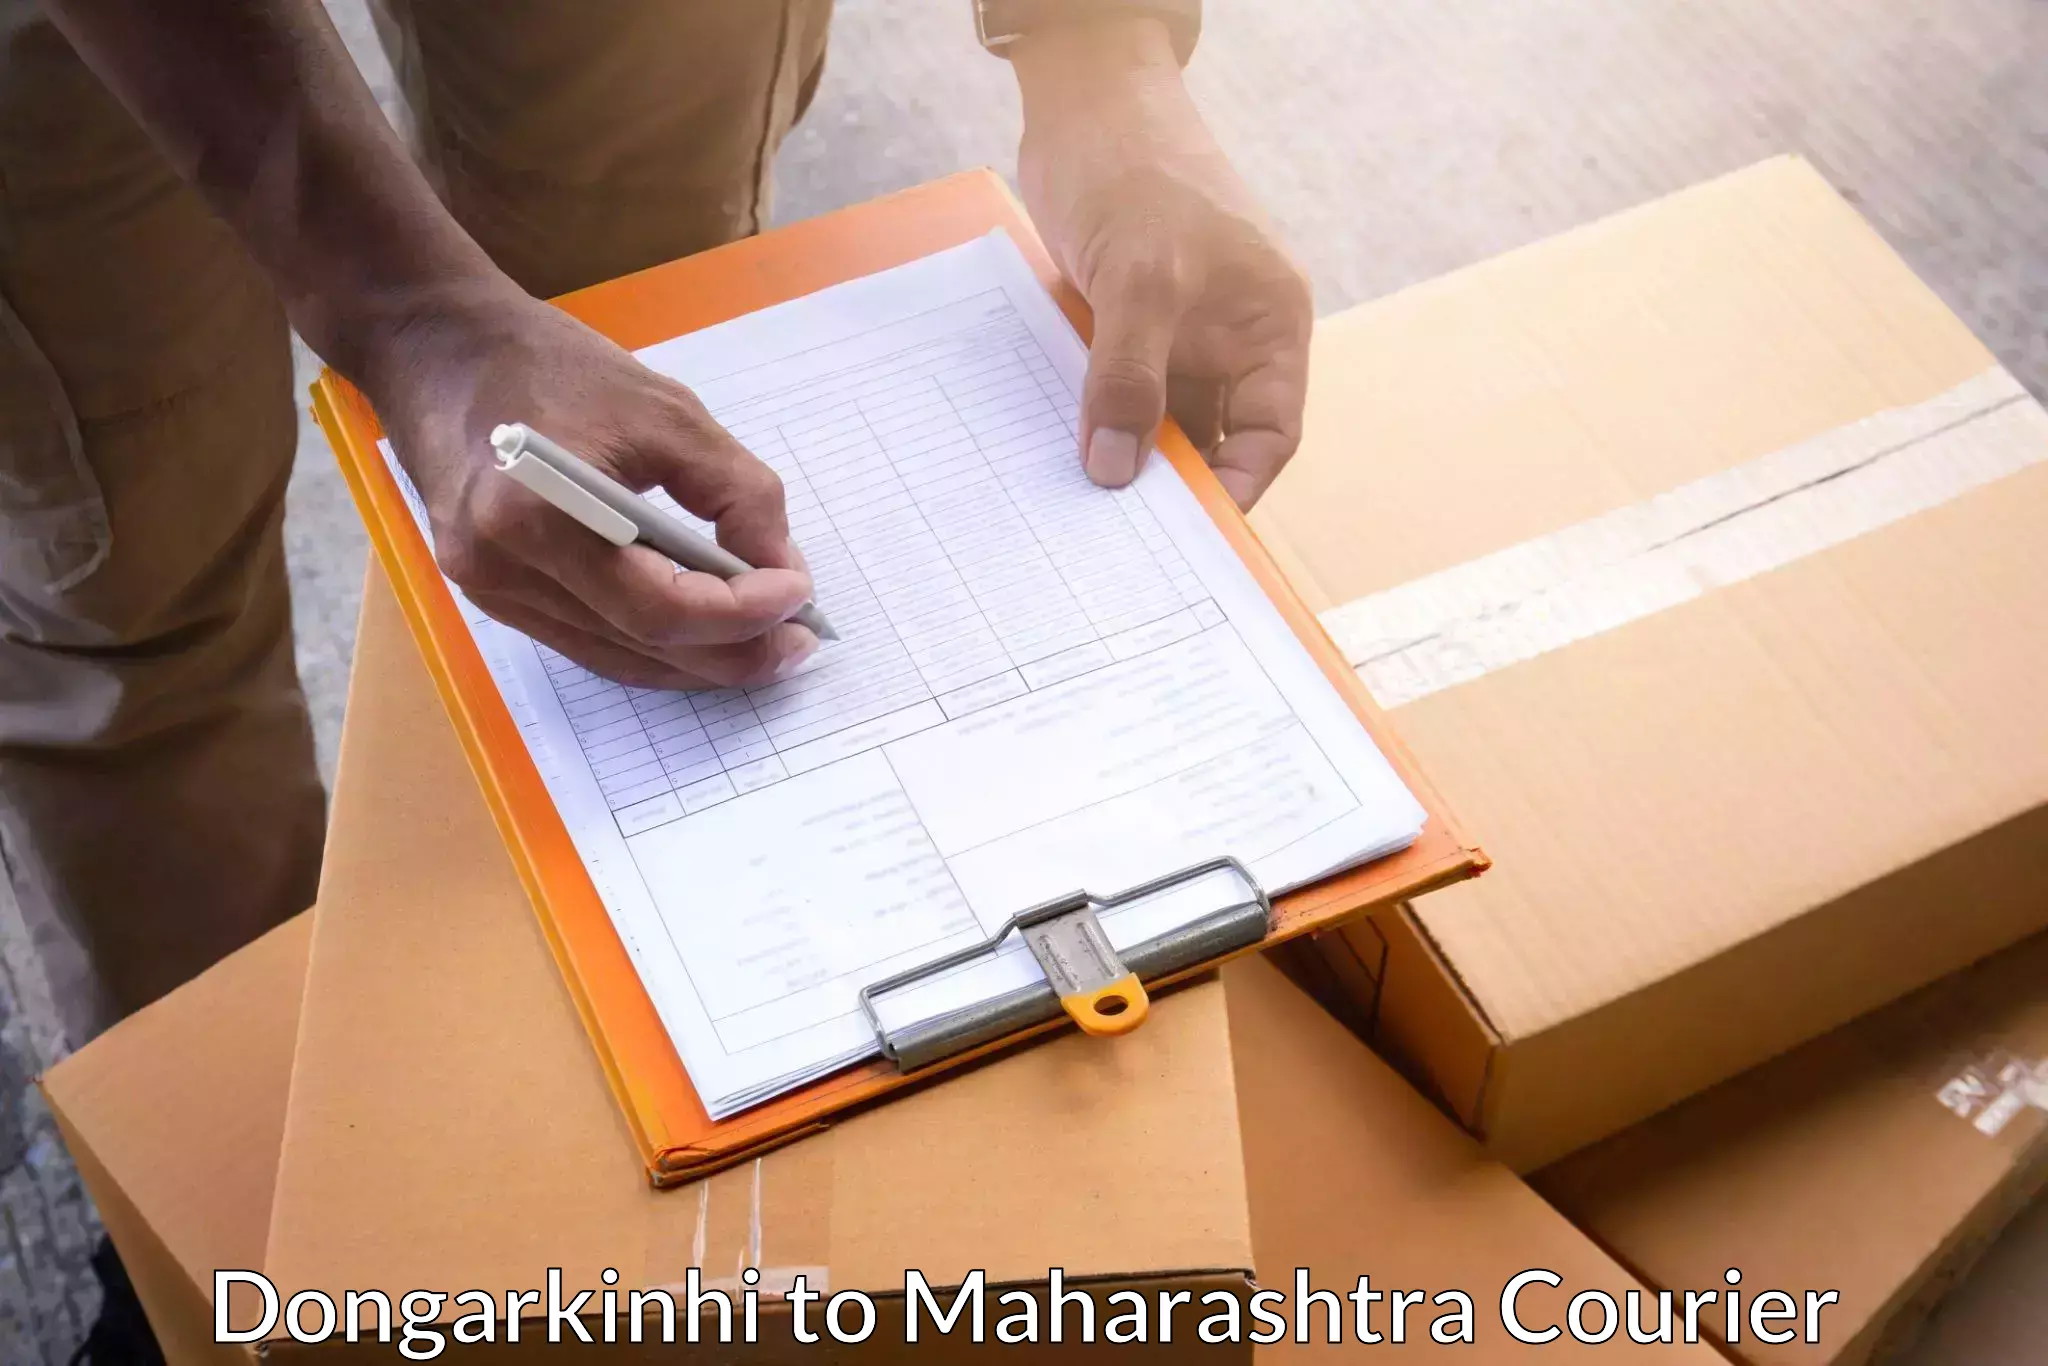 Reliable shipping partners in Dongarkinhi to Nagothane